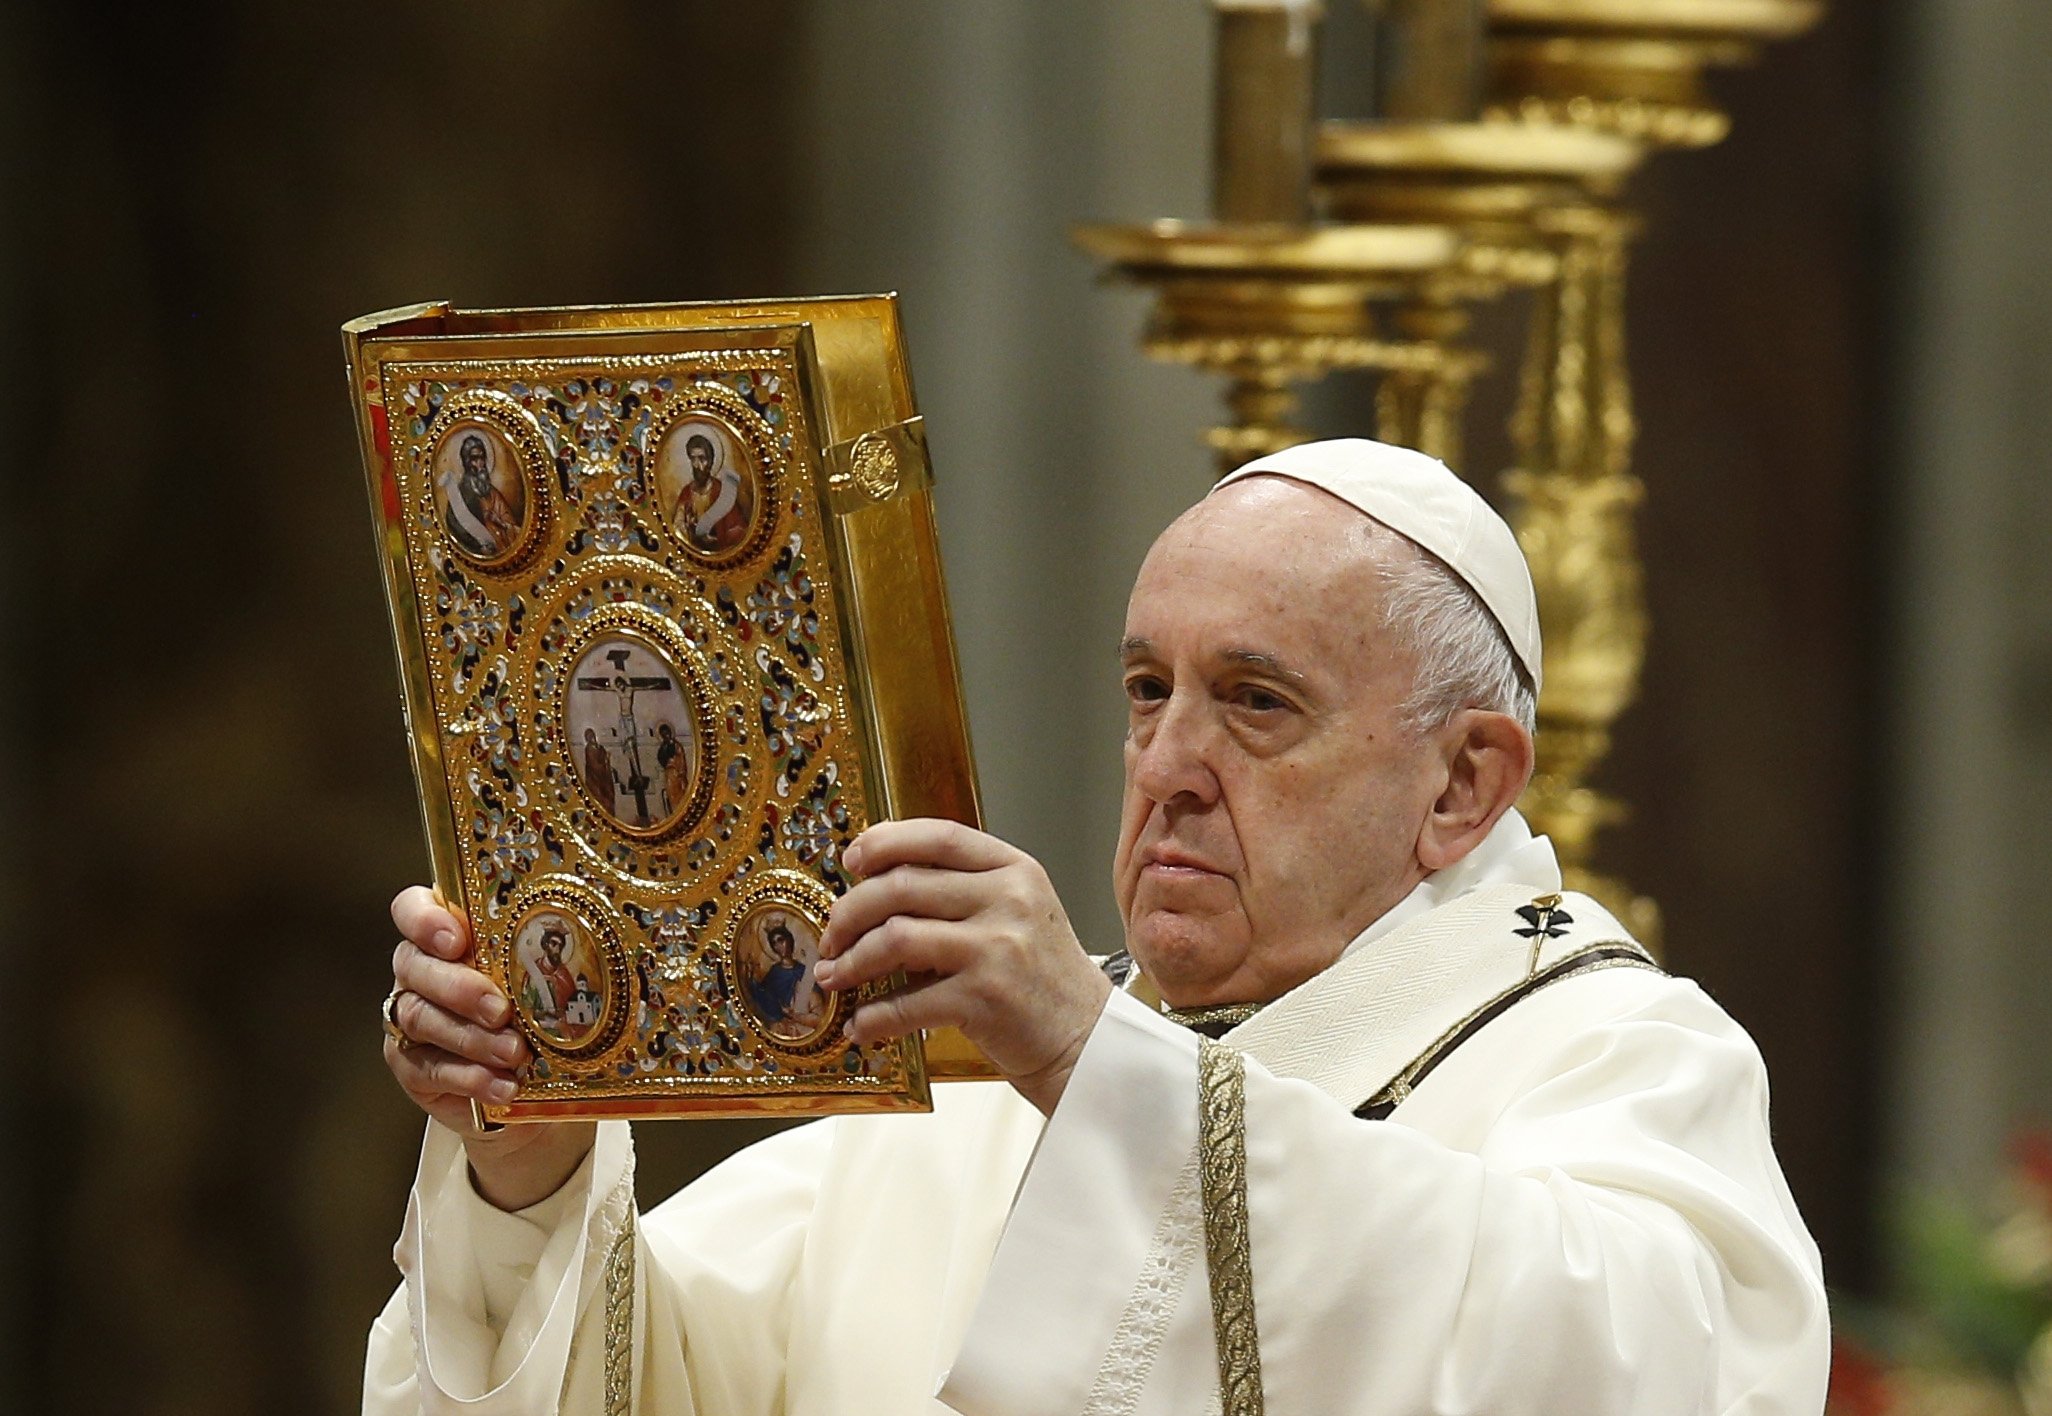 Pope Francis: Christians must encounter the Bible, not just recite 'like parrots' | America Magazine